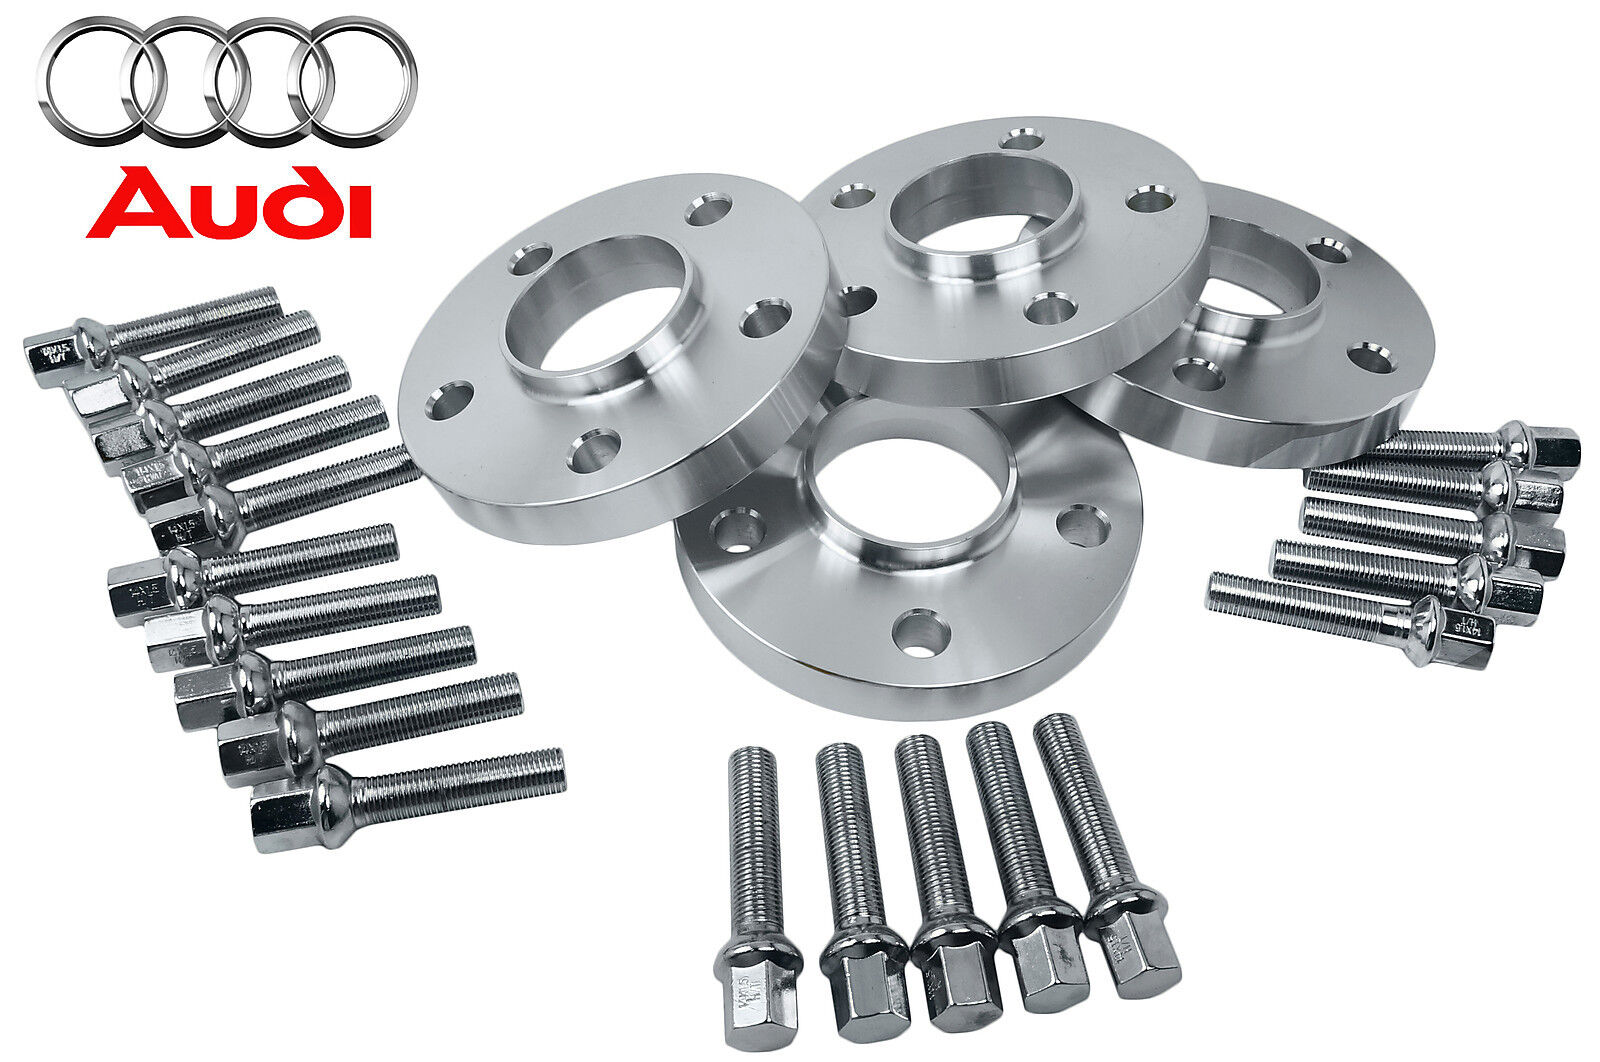 4pc Audi Wheel Spacers Kit 5x112 (66.56mm) Fits Models: A4, S4 and Q5 2009-2014 